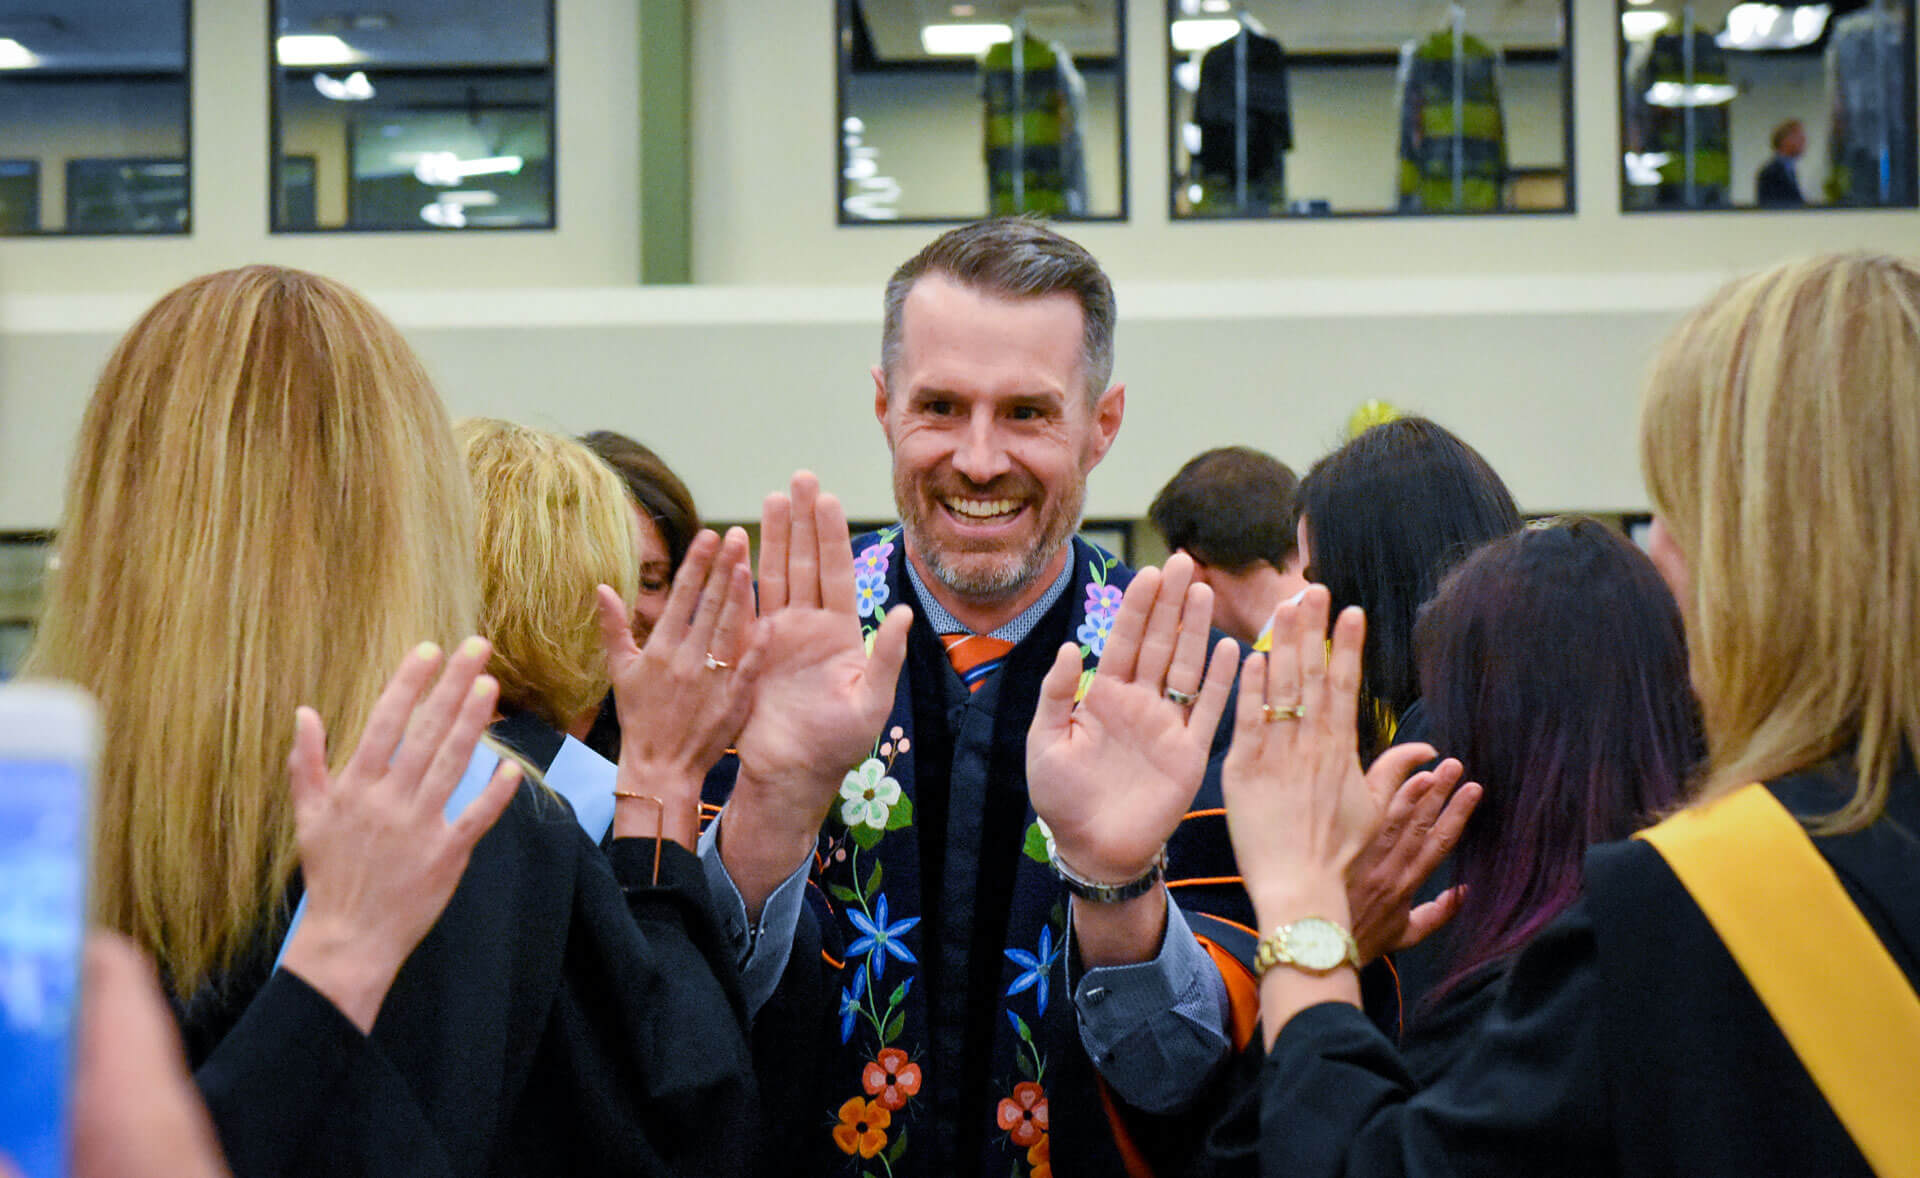 Dr. Neil Fassina, who served as AU president from 2016 until 2021, gives high fives to graduates of the Class of 2018. Fassina made it a tradition to high five all graduates before they crossed the stage.